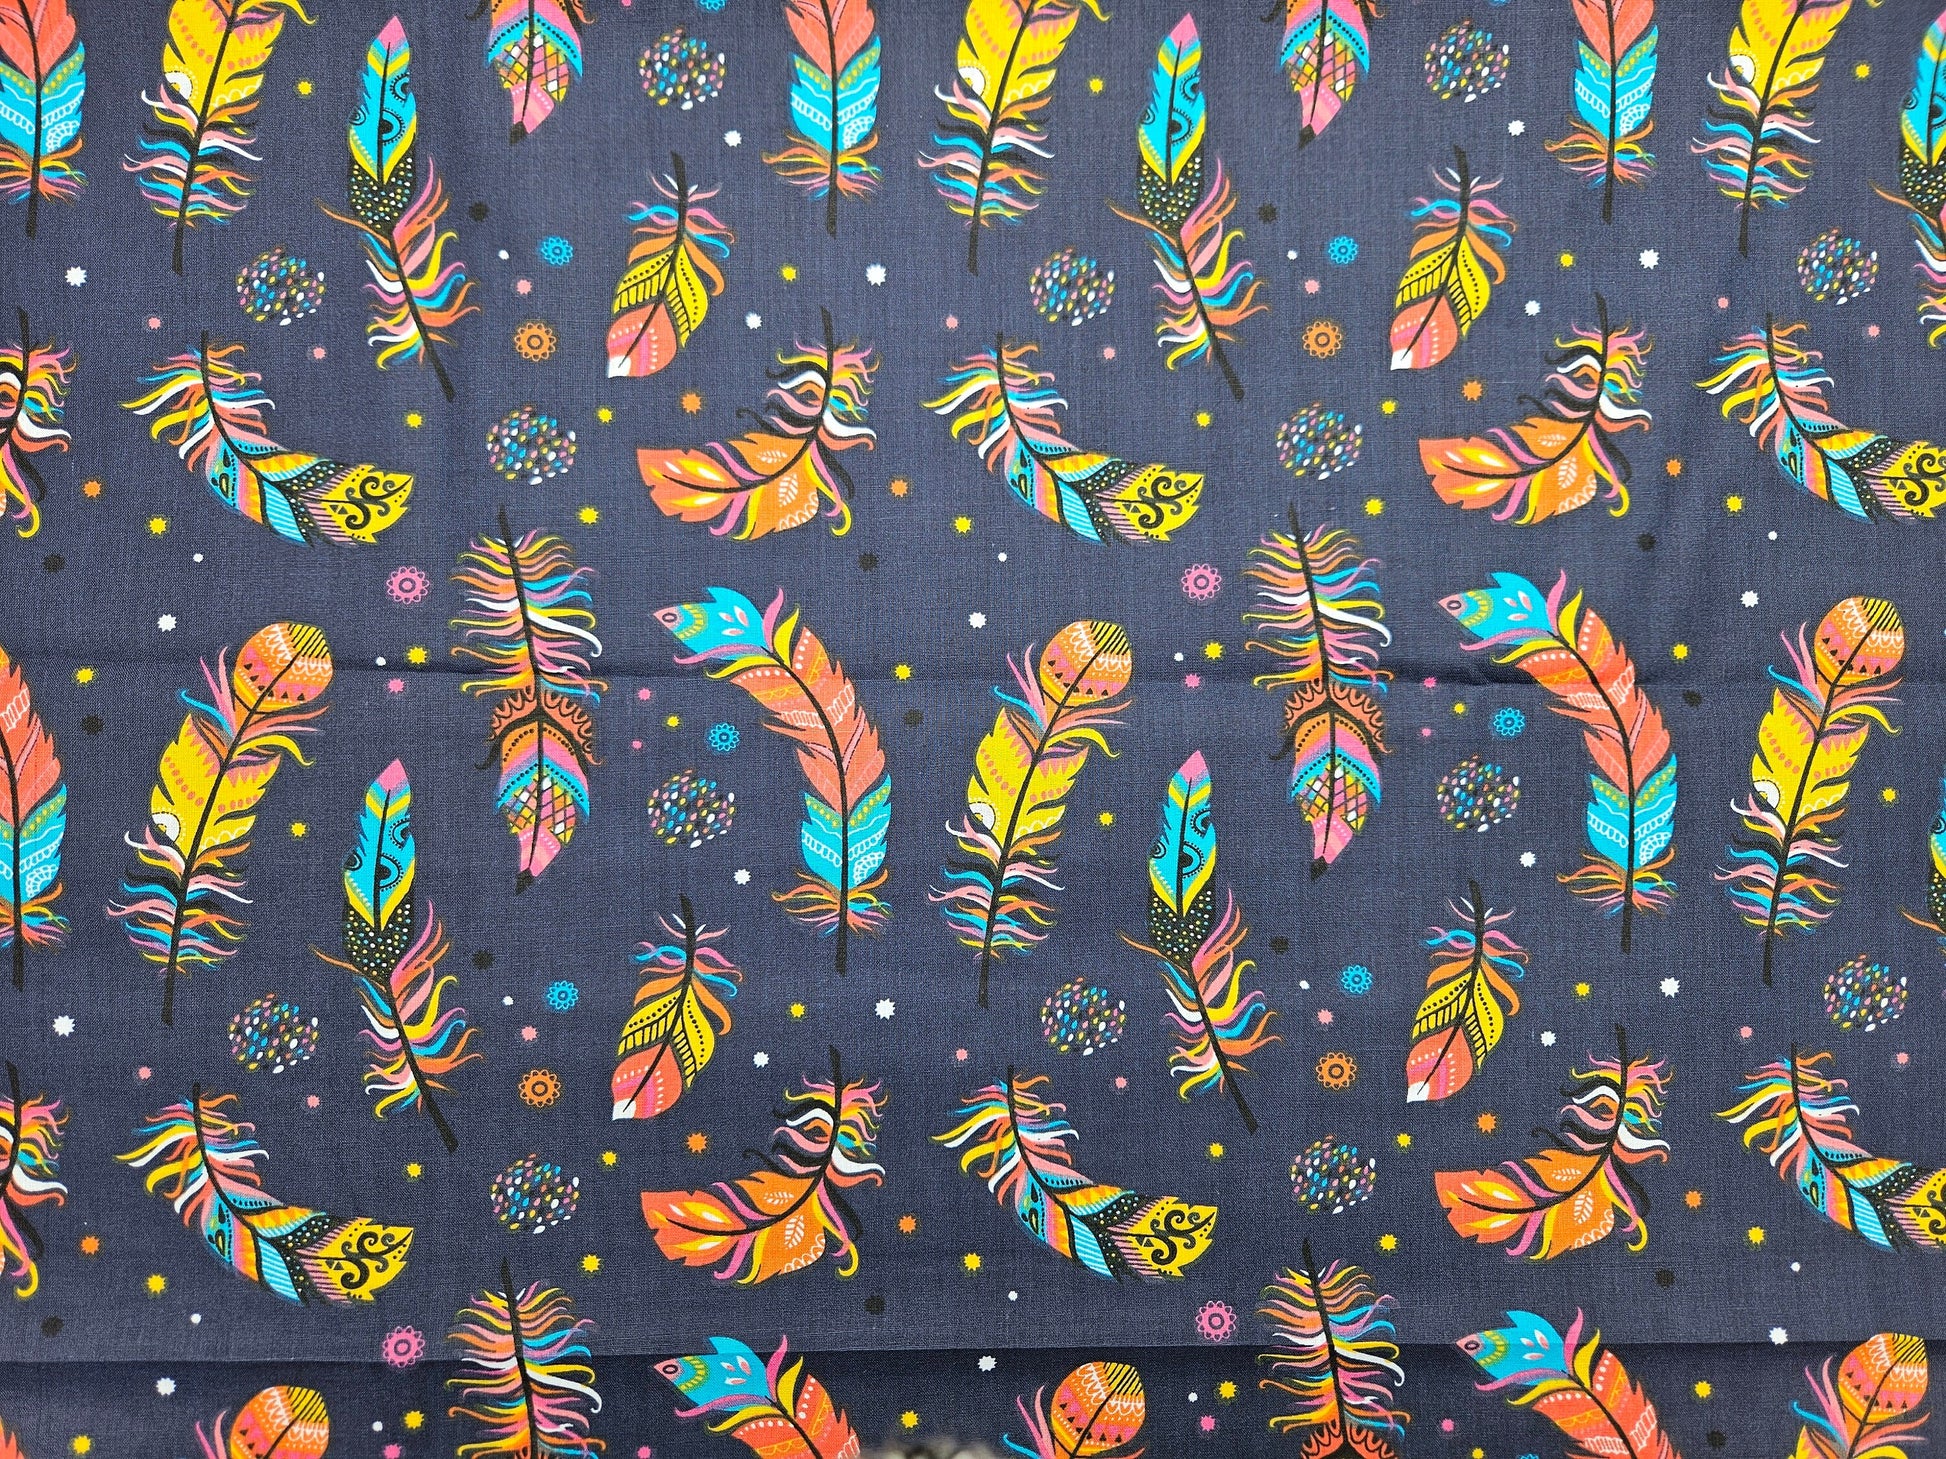 Feathers on Navy Background 100% Cotton Fabric | 160cm Wide | Sold by Half a Meter | Sewing Essentials | Crafts